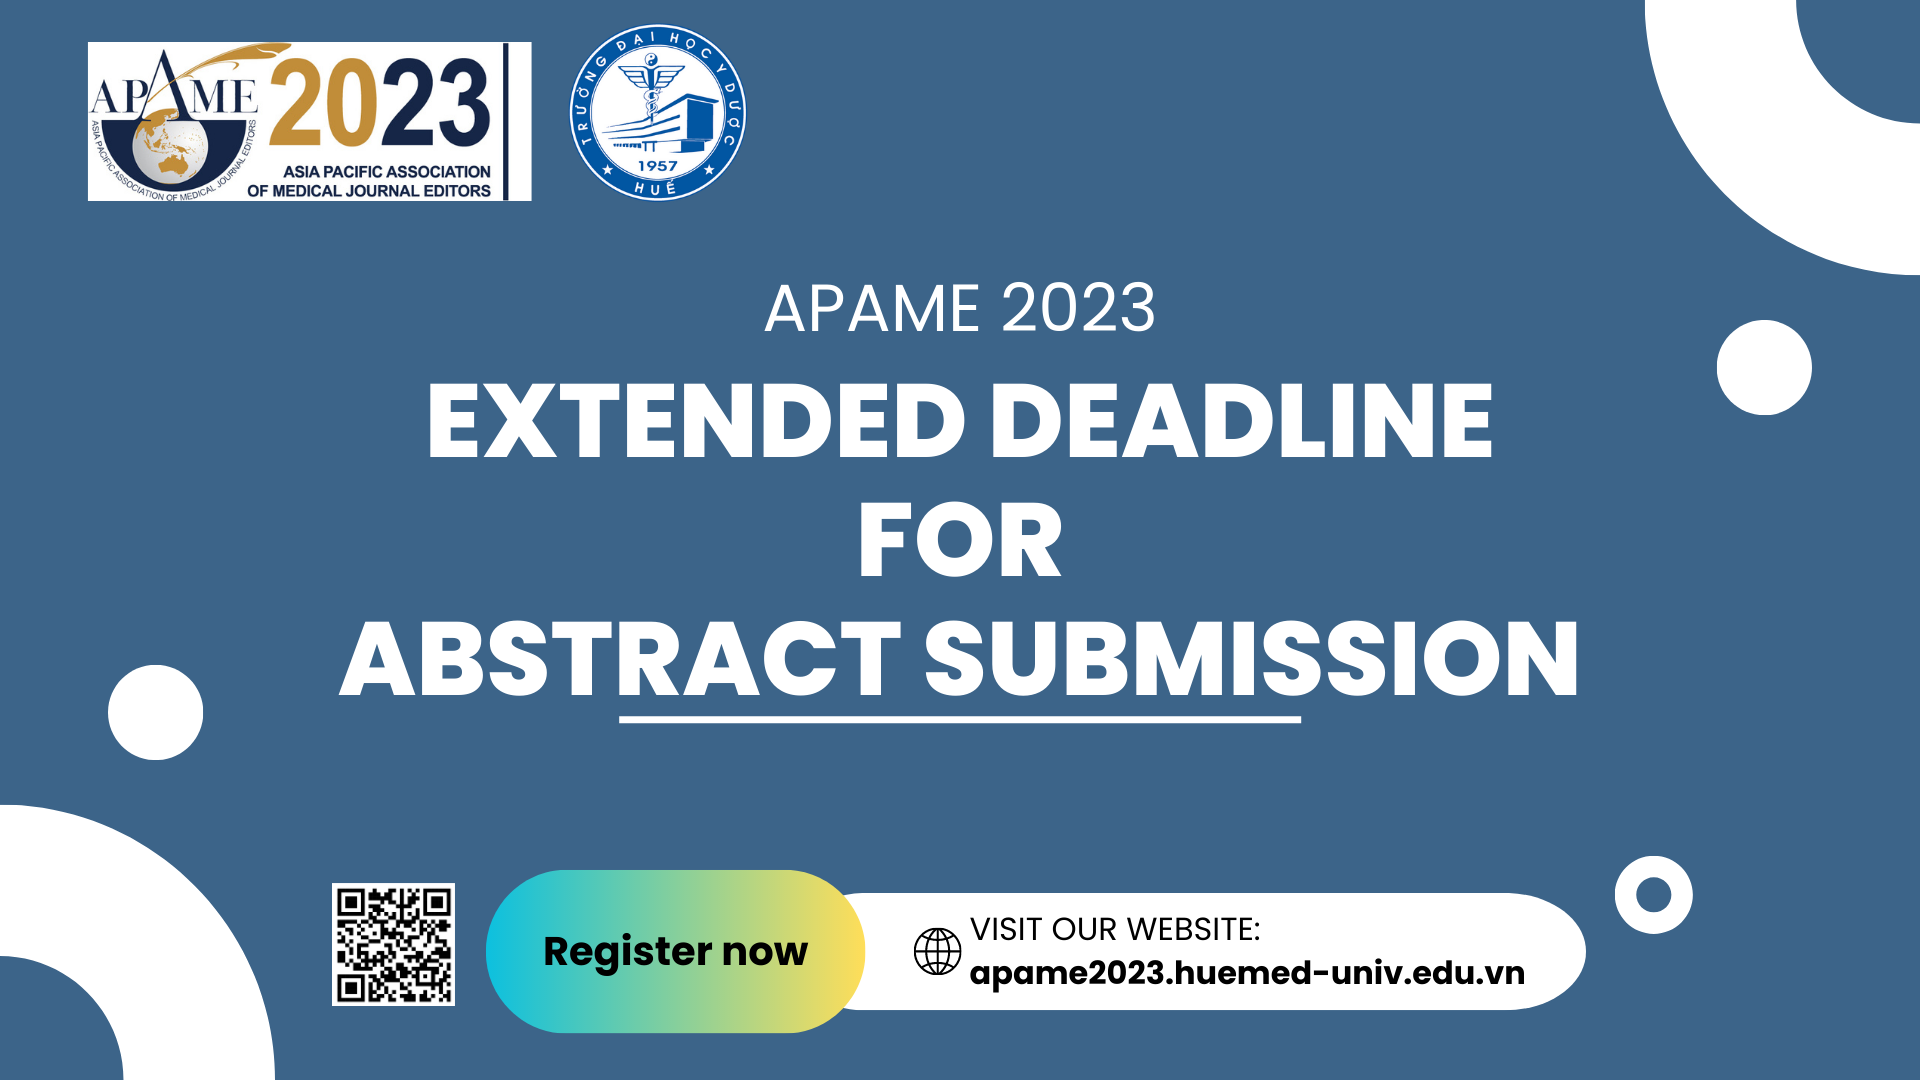 APAME 2023 Asia Pacific Association of Medical Journal Editors